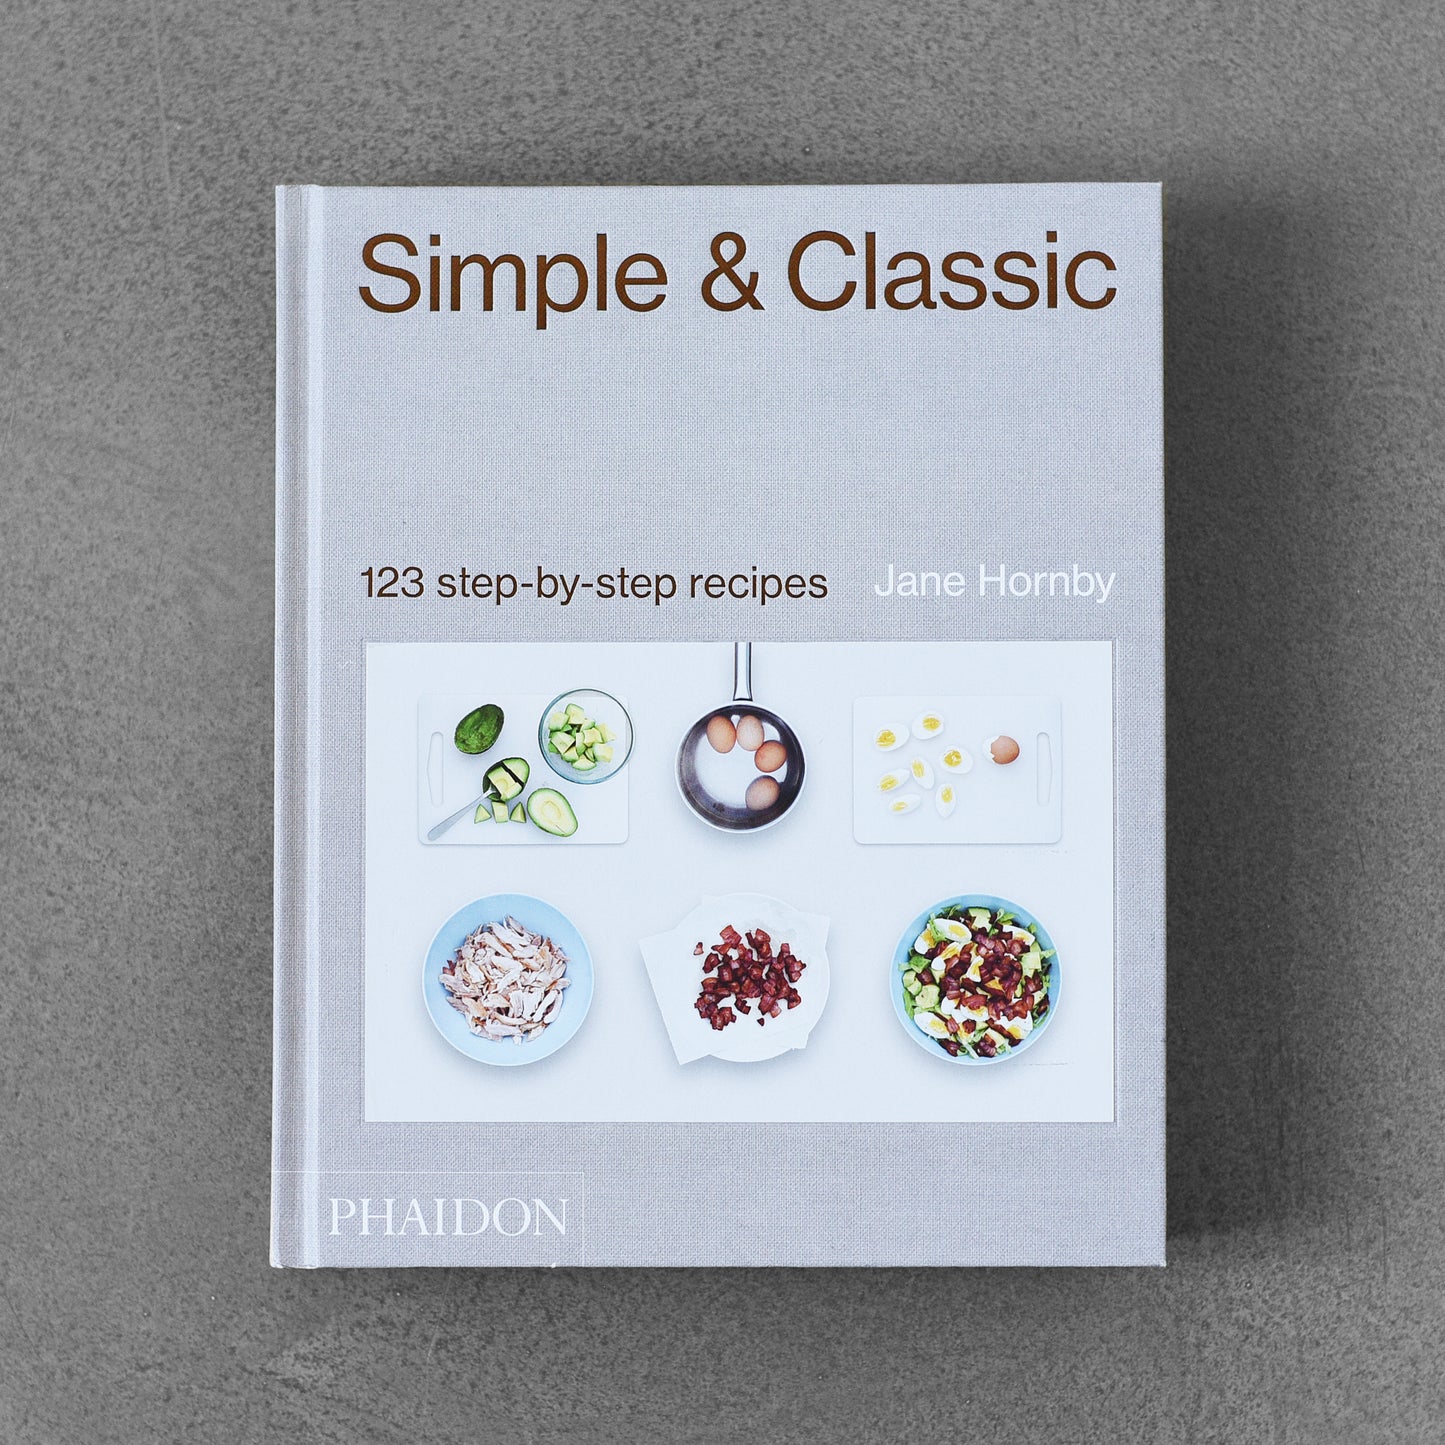 Simple & Classic: 123 Step-by-step Recipes